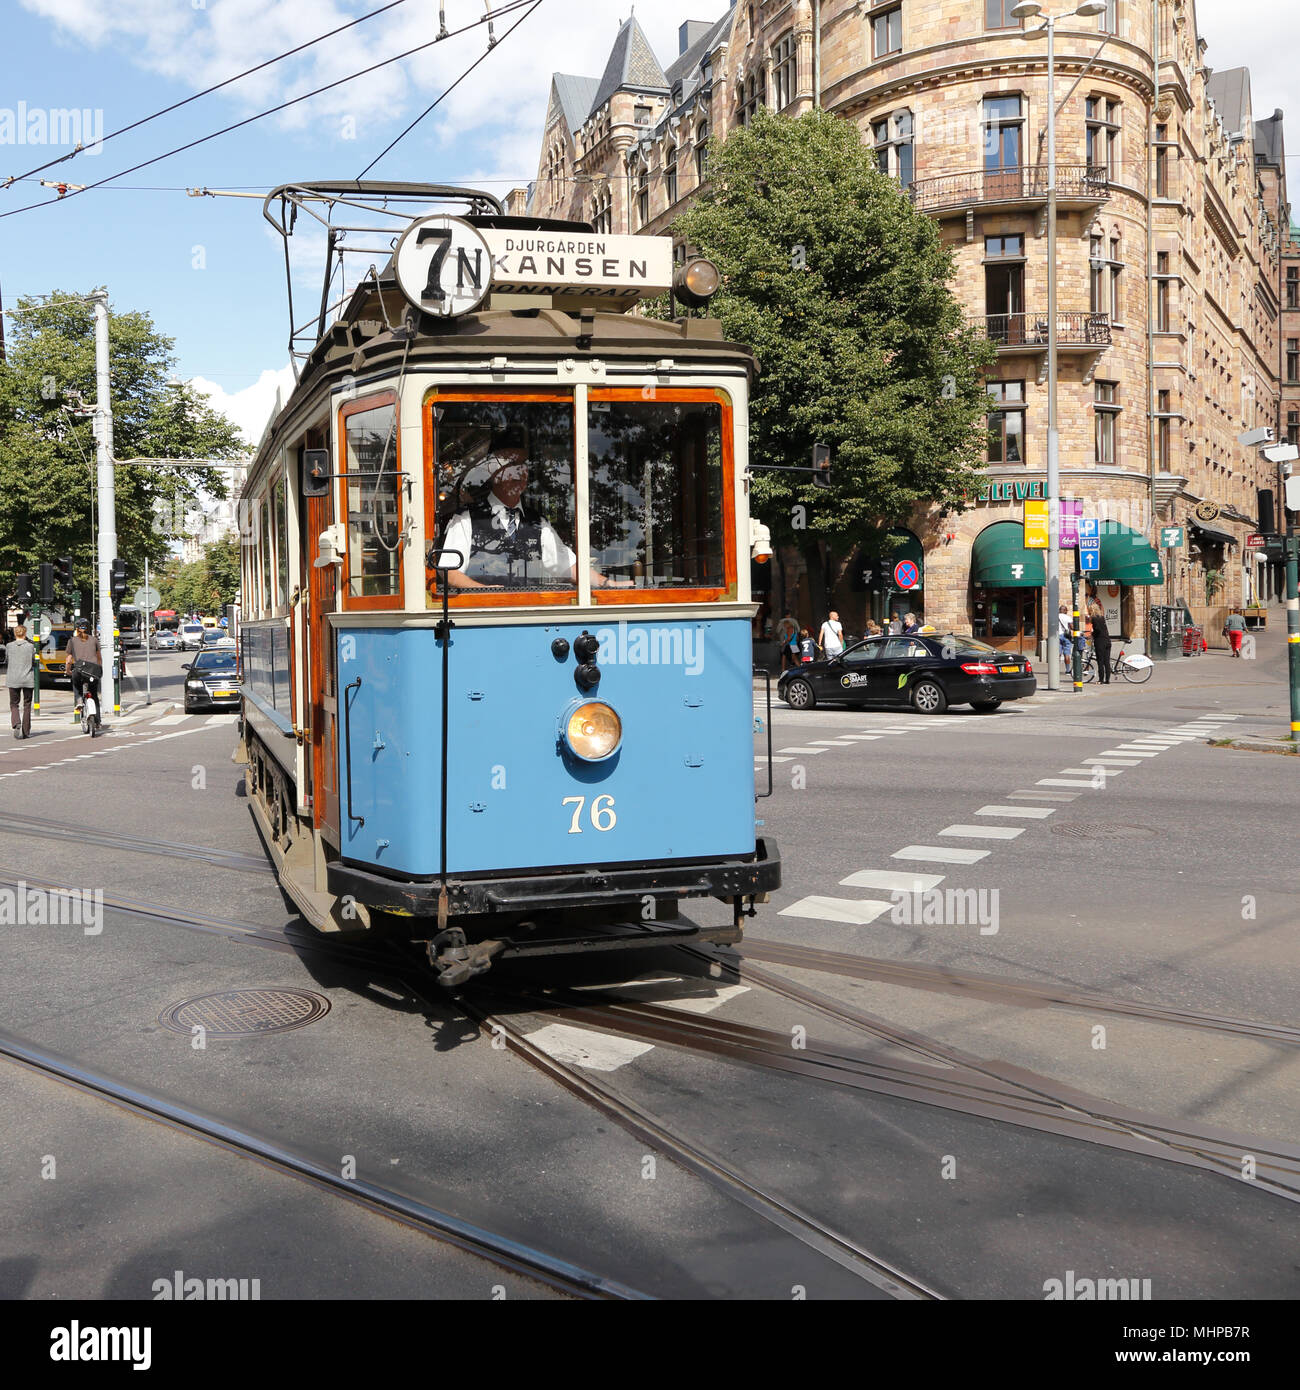 Stockholm, Sweden - August 13, 2013: A blue museum tram route between Norrmalmstorg and Skansen at Nybroplan. Stock Photo